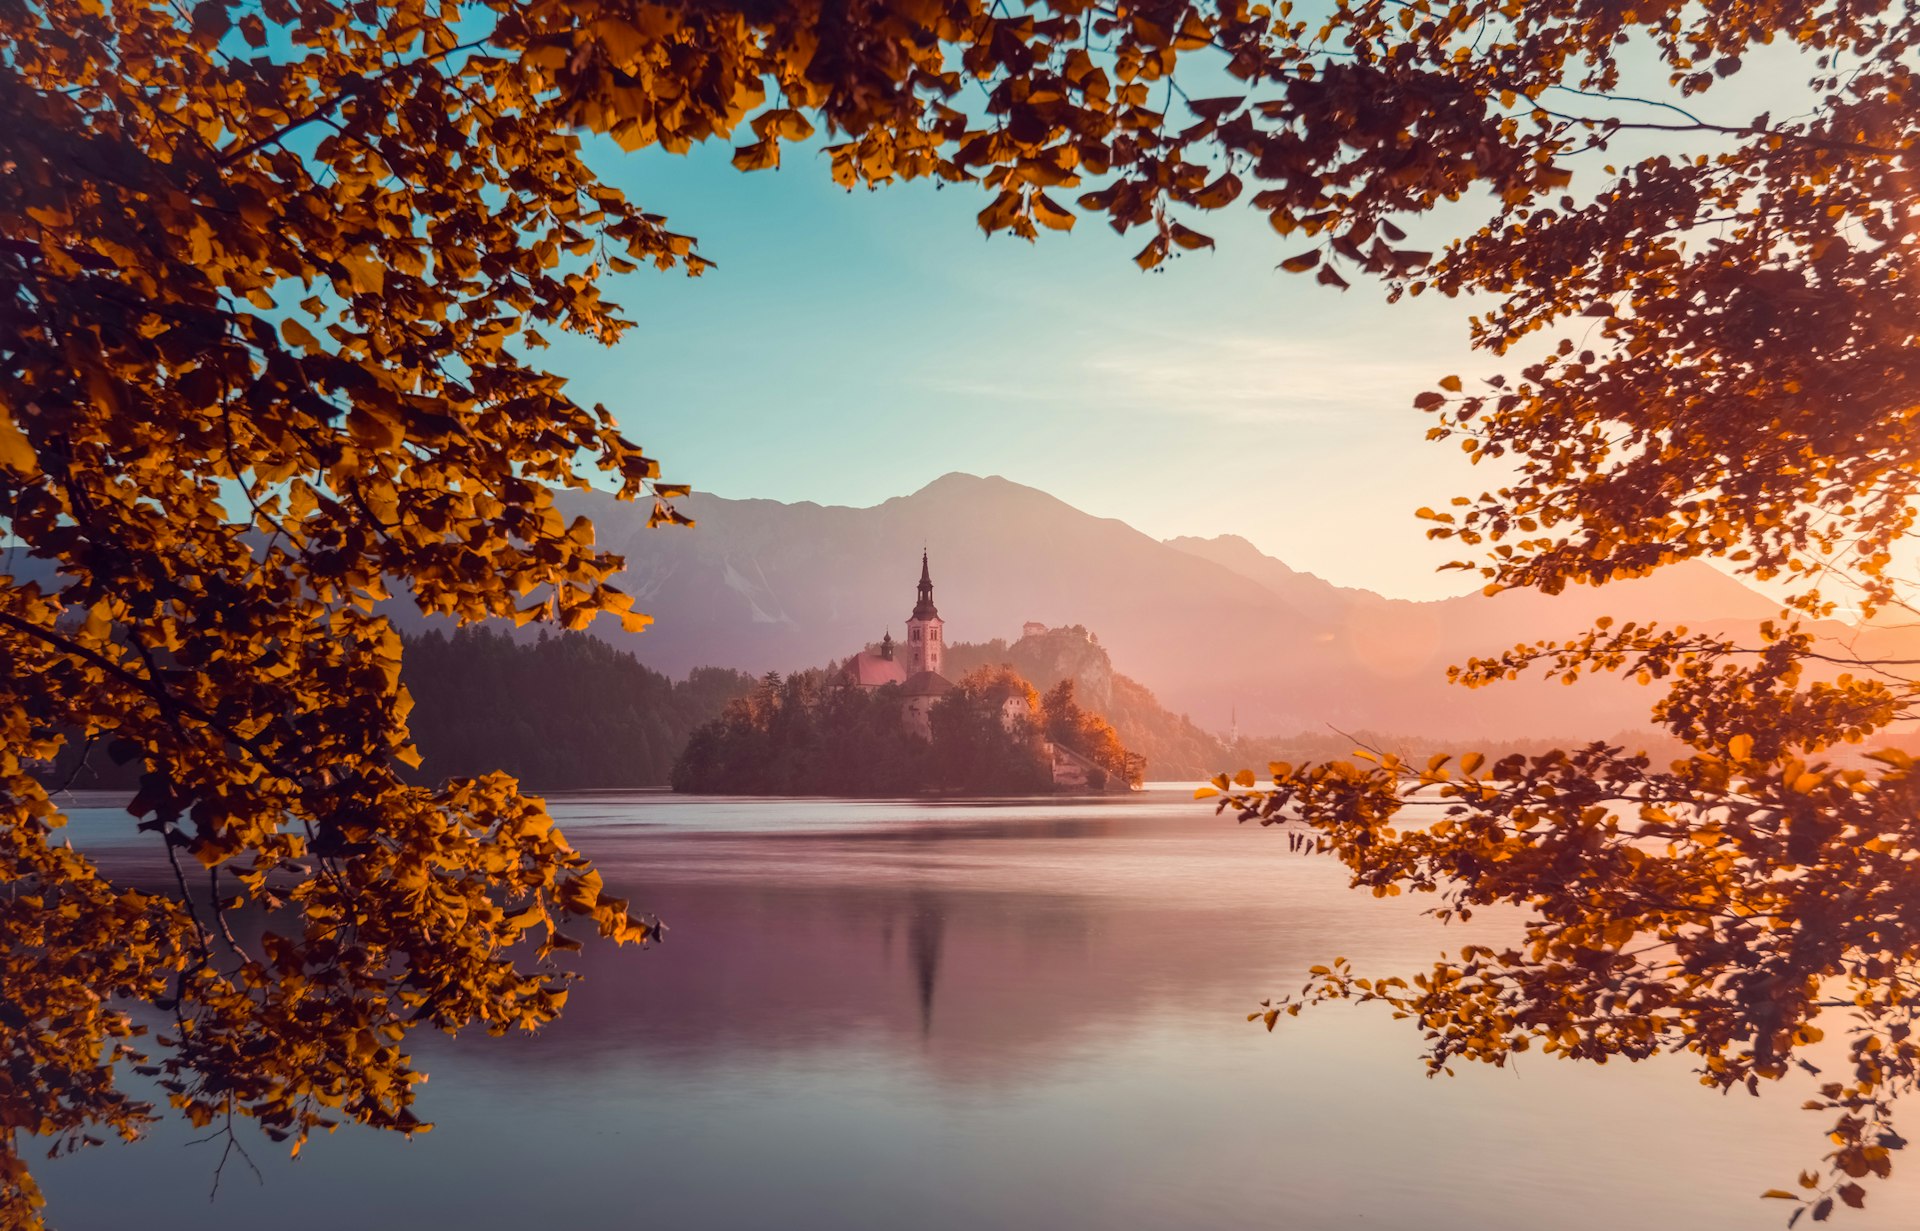 Framed by autumn leaves, Bled Island juts out of Lake Bled at sunrise with the Church of the Assumption with Castle